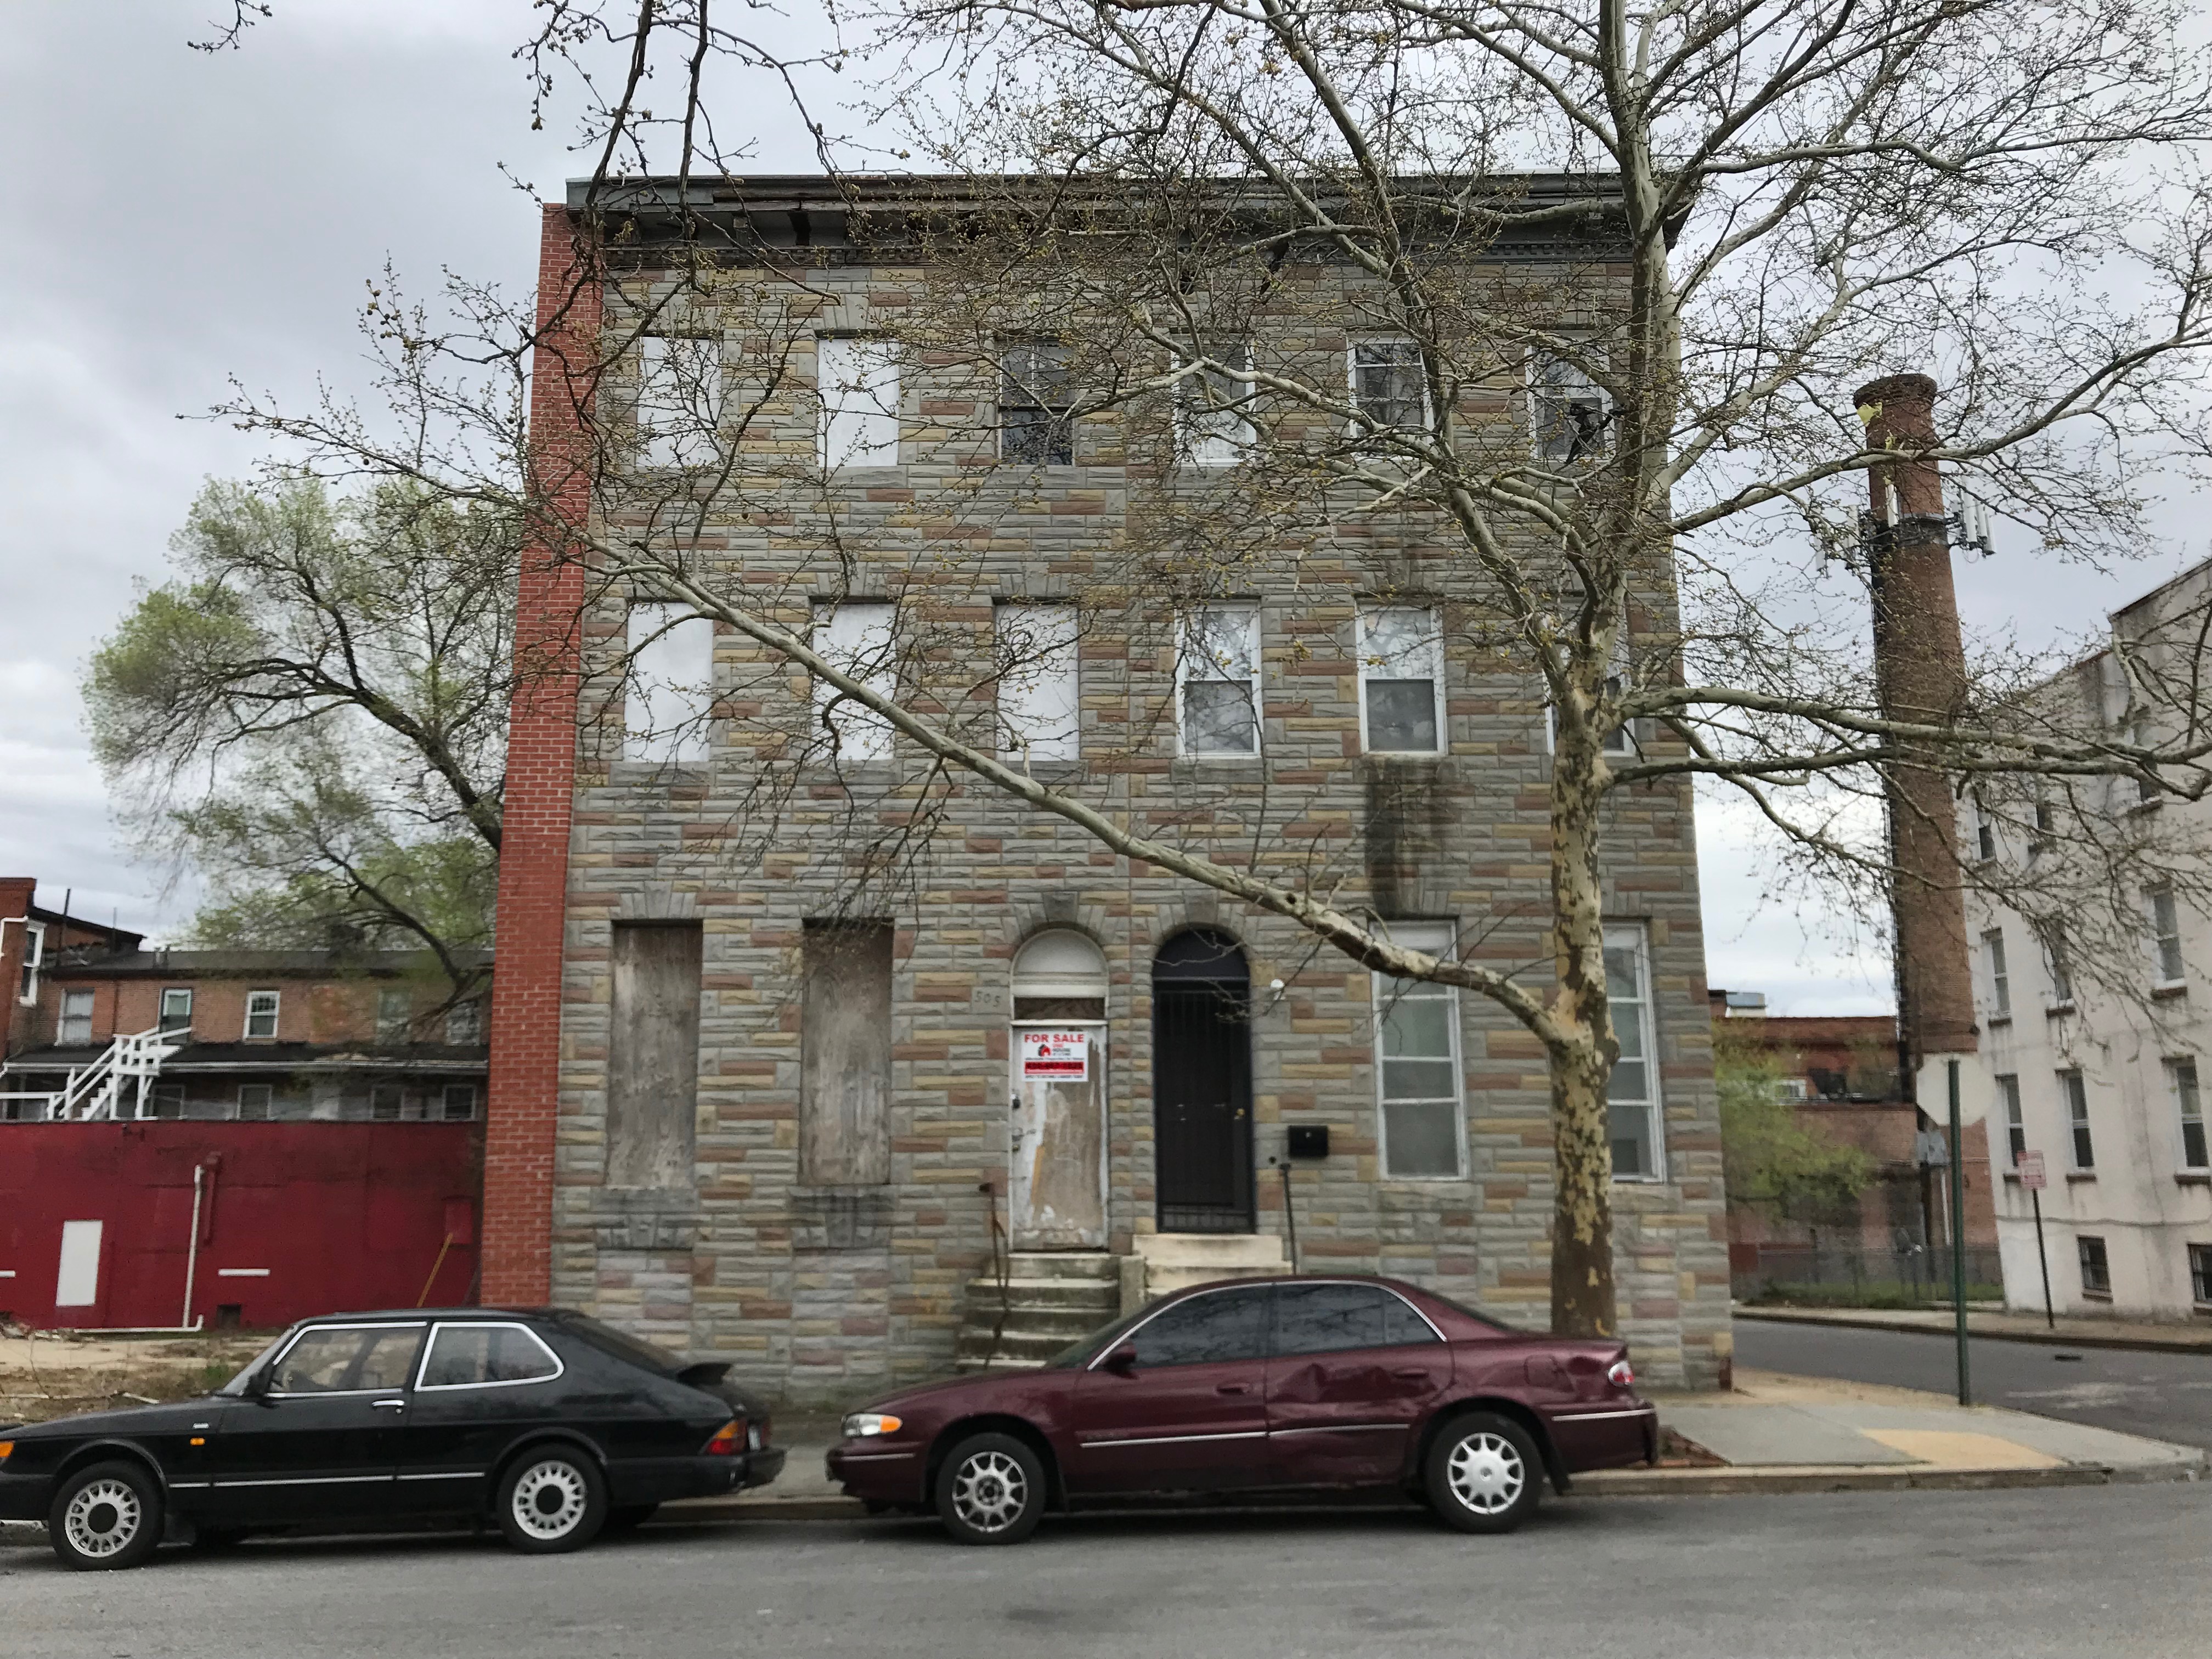 Rowhouses, 505–507 W. Mosher Street, Baltimore, MD 21217, Baltimore, Building, Car, Intersection, HQ Photo